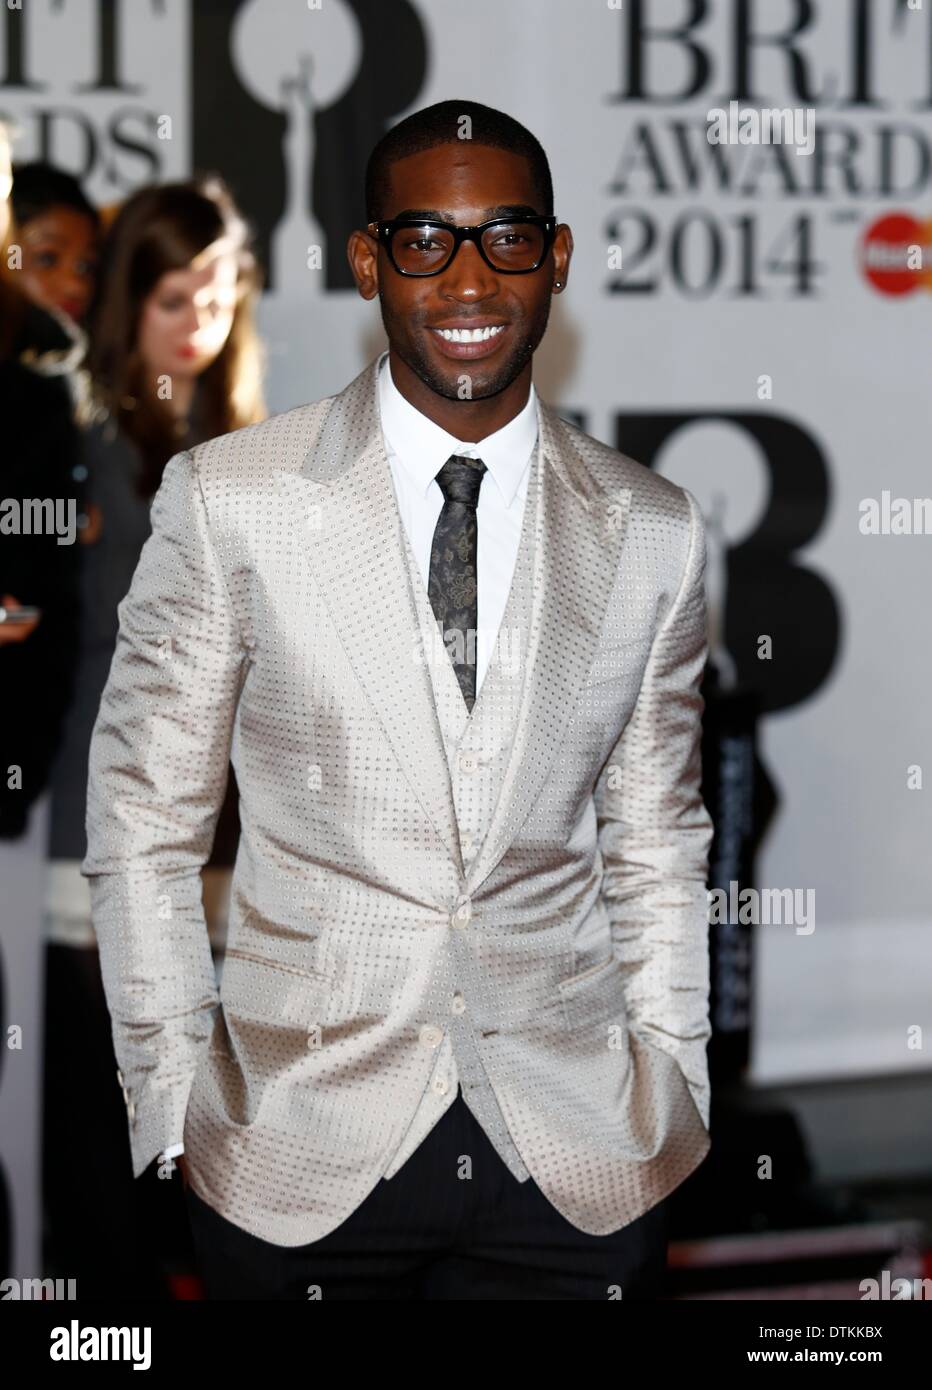 London, UK . 19th Feb, 2014. Tinie Tempah arrives at the BRIT Awards 2014 at O2 Arena in London, Great Britain, on 19 February 2014. Photo: Hubert B?sl Credit:  dpa picture alliance/Alamy Live News Stock Photo